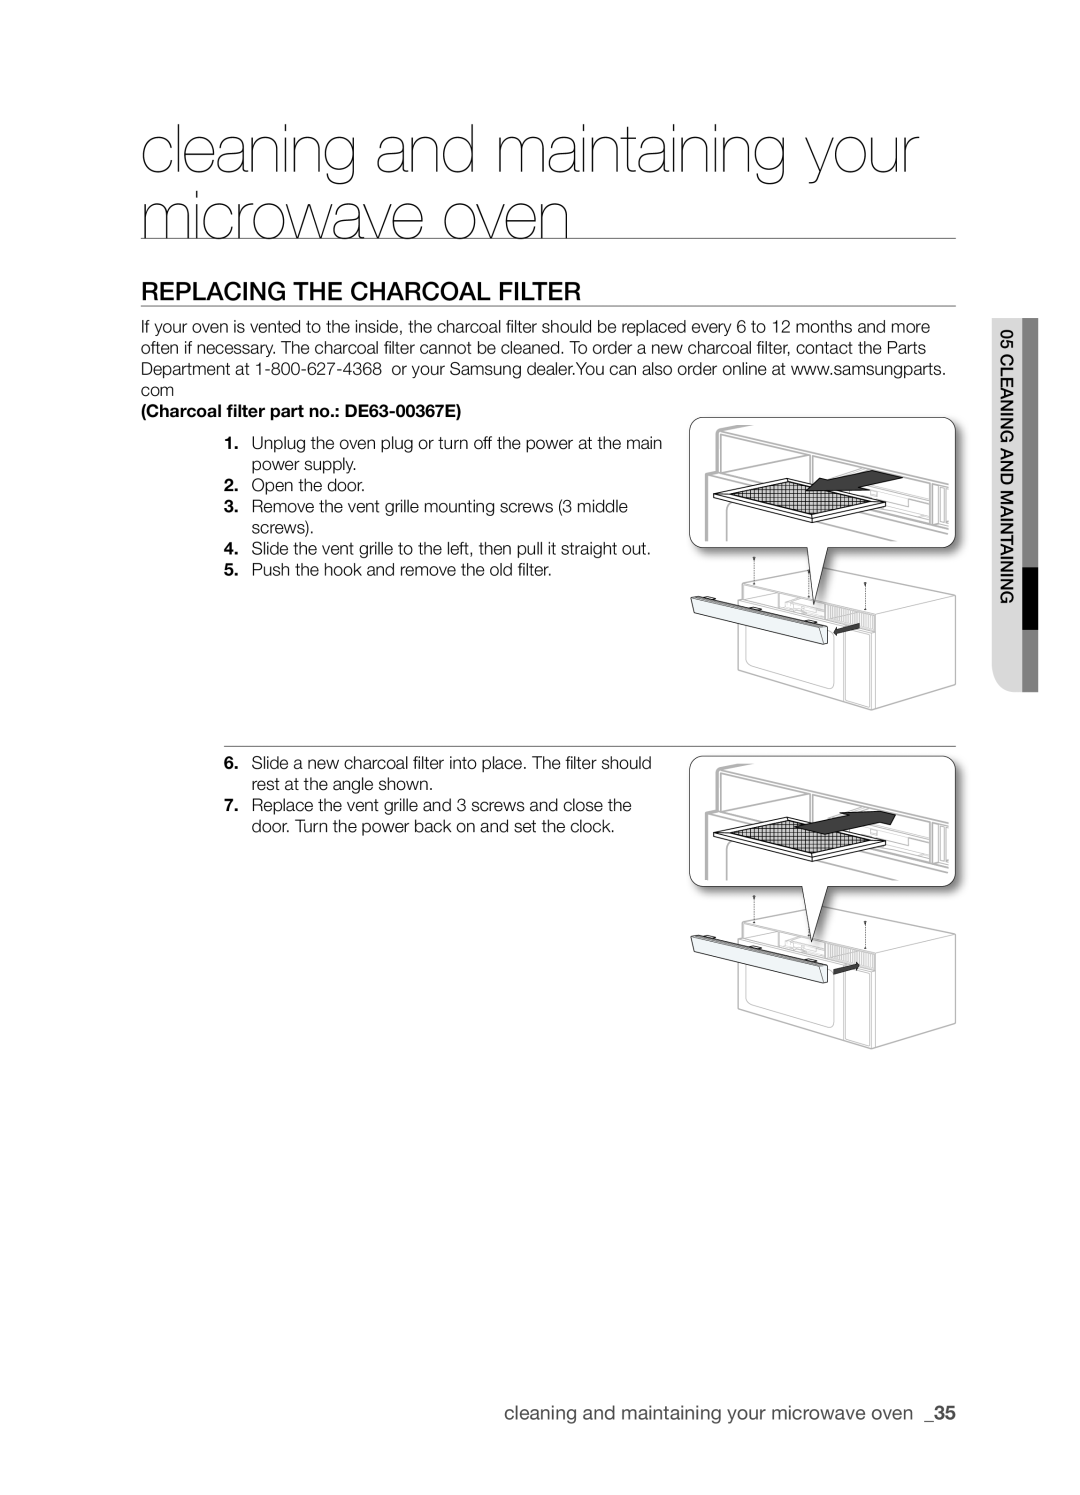 Samsung SMH9151B user manual Replacing the charcoal filter, cleaning and maintaining your microwave oven 